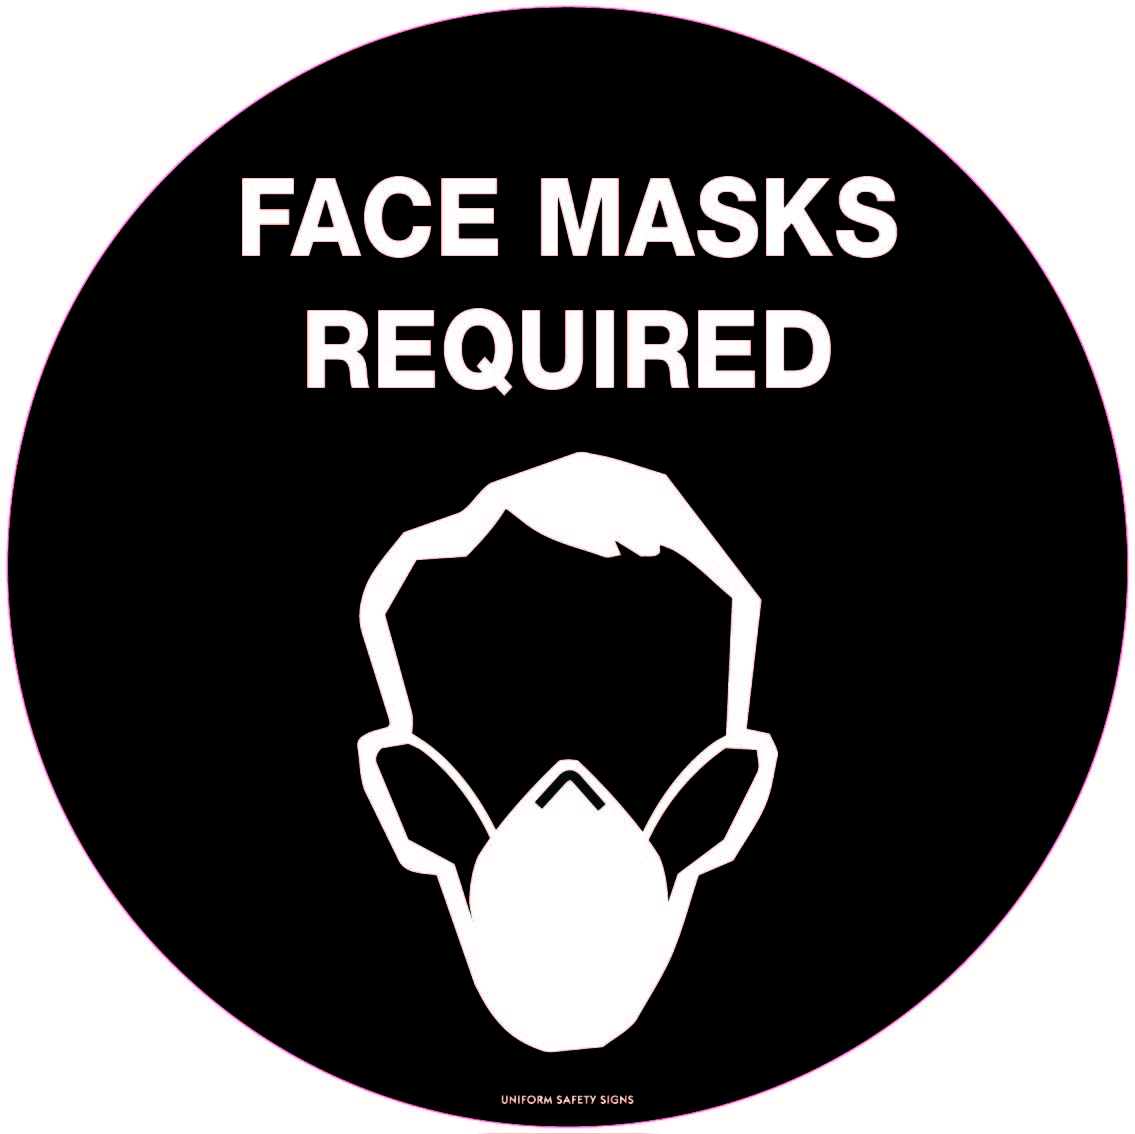 ANTI SLIP FLOOR GRAPHIC 300MM - FACE MASKS REQUIRED 